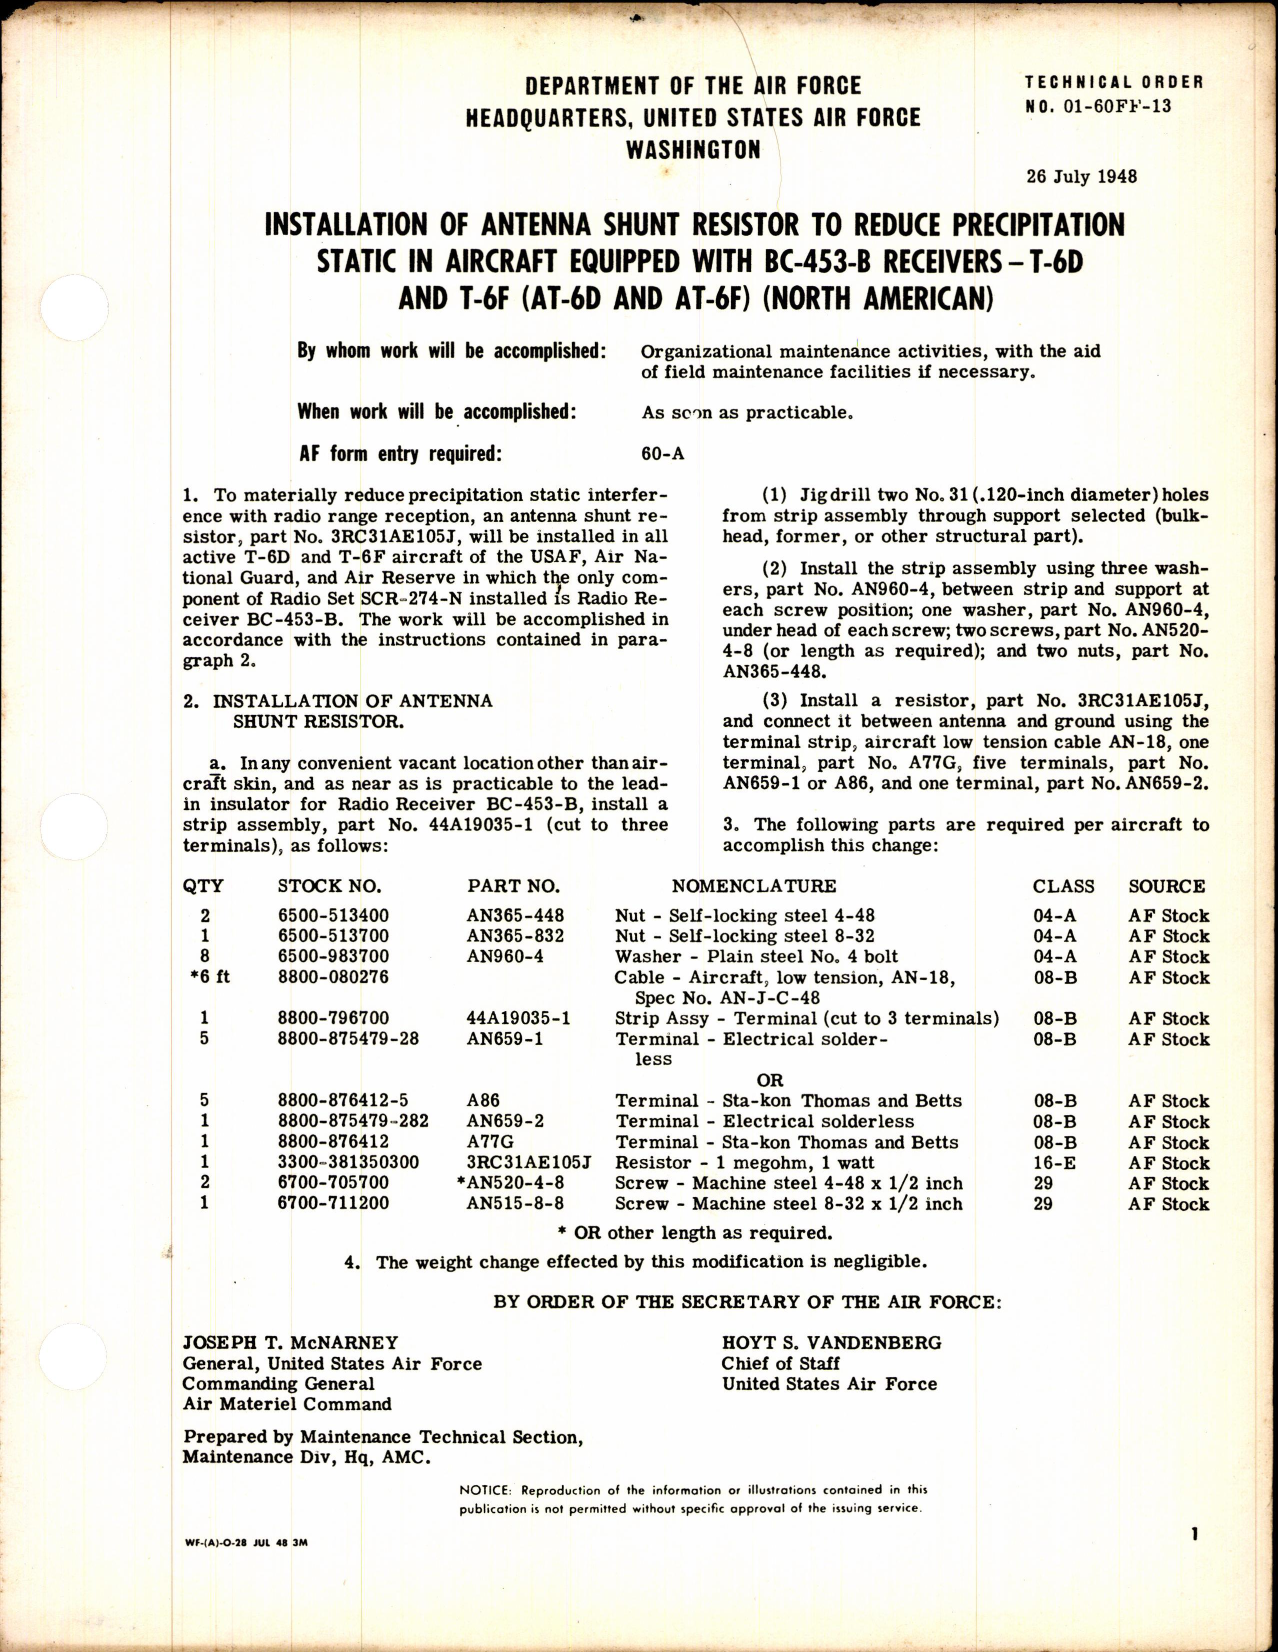 Sample page 1 from AirCorps Library document: Installation of Antenna Shunt Resistor to Reduce Precipitation Static in Aircraft Equipped with BC-45-B, Receivers